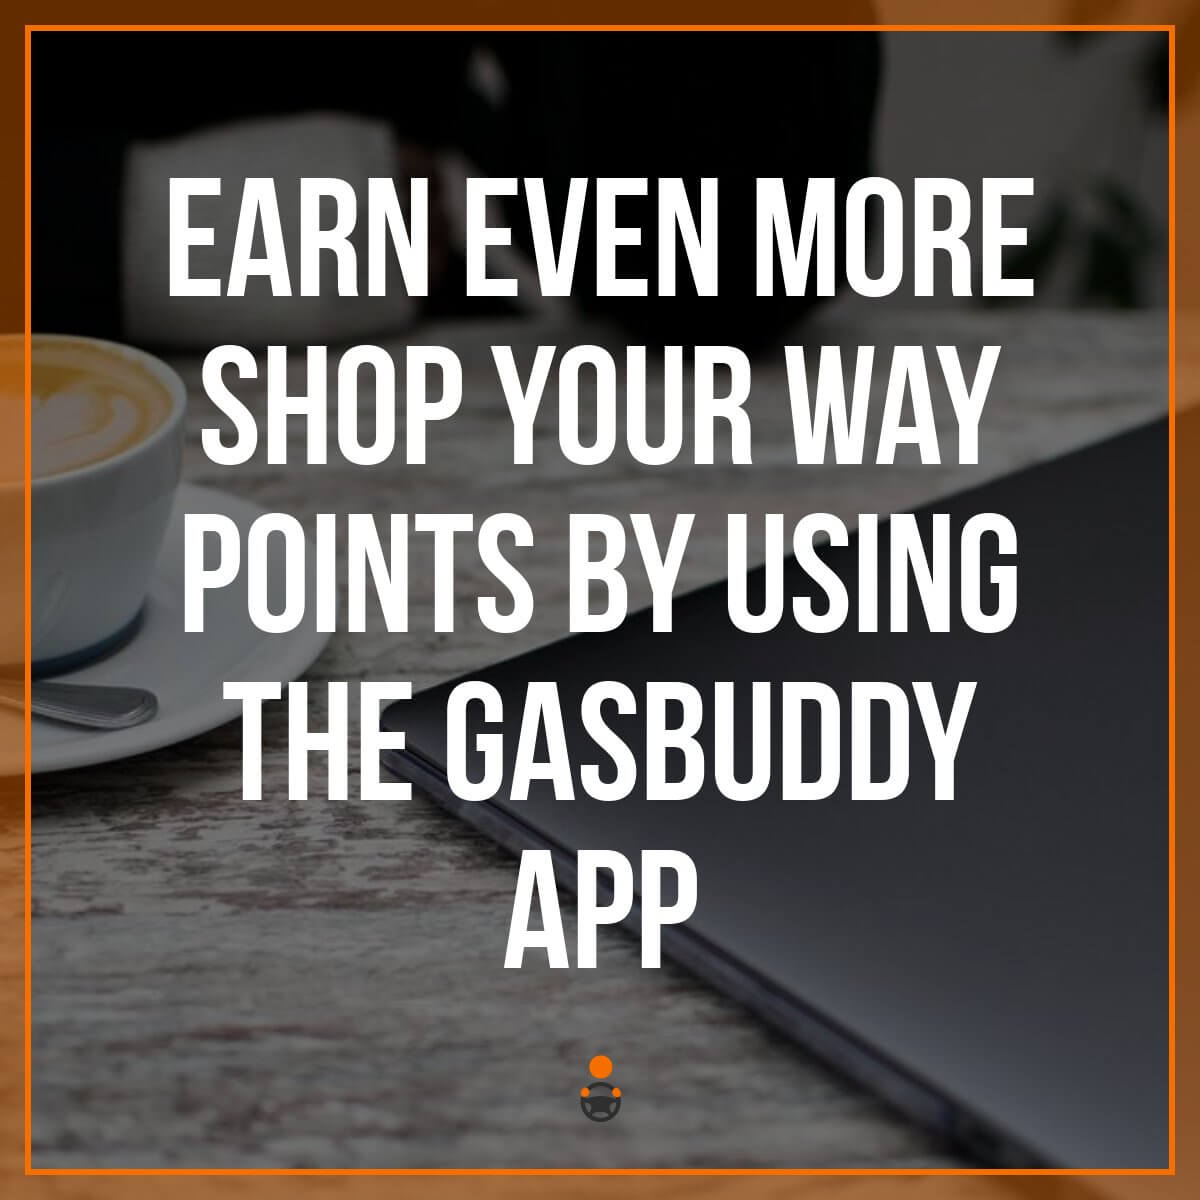 Earn Even More Shop Your Way Points by Using the GasBuddy App